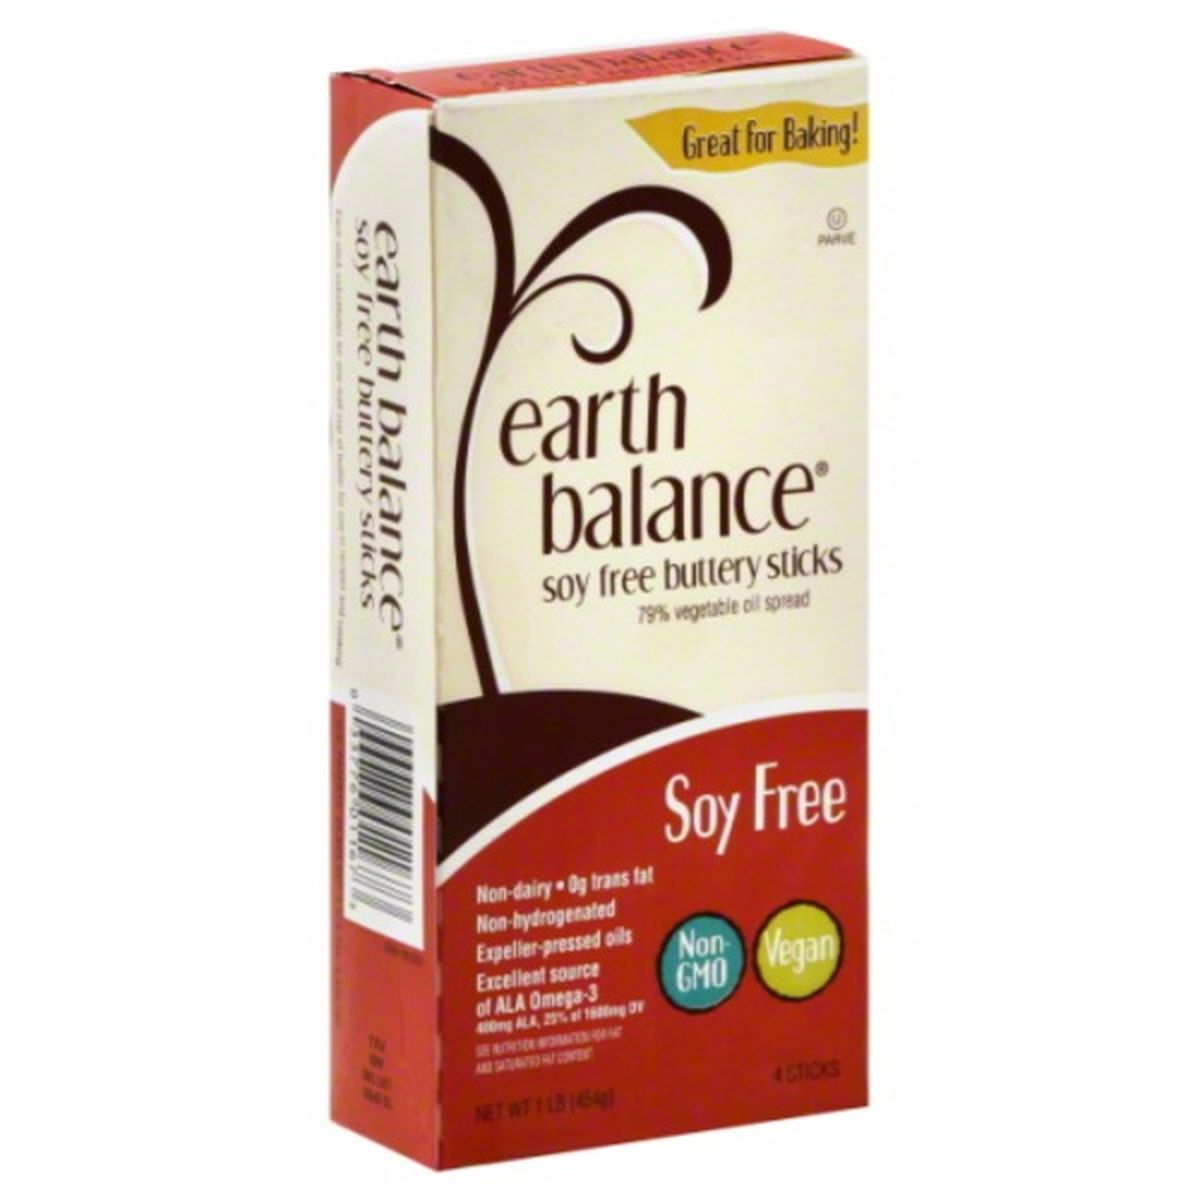 Calories in Earth Balance Buttery Sticks, Soy Free